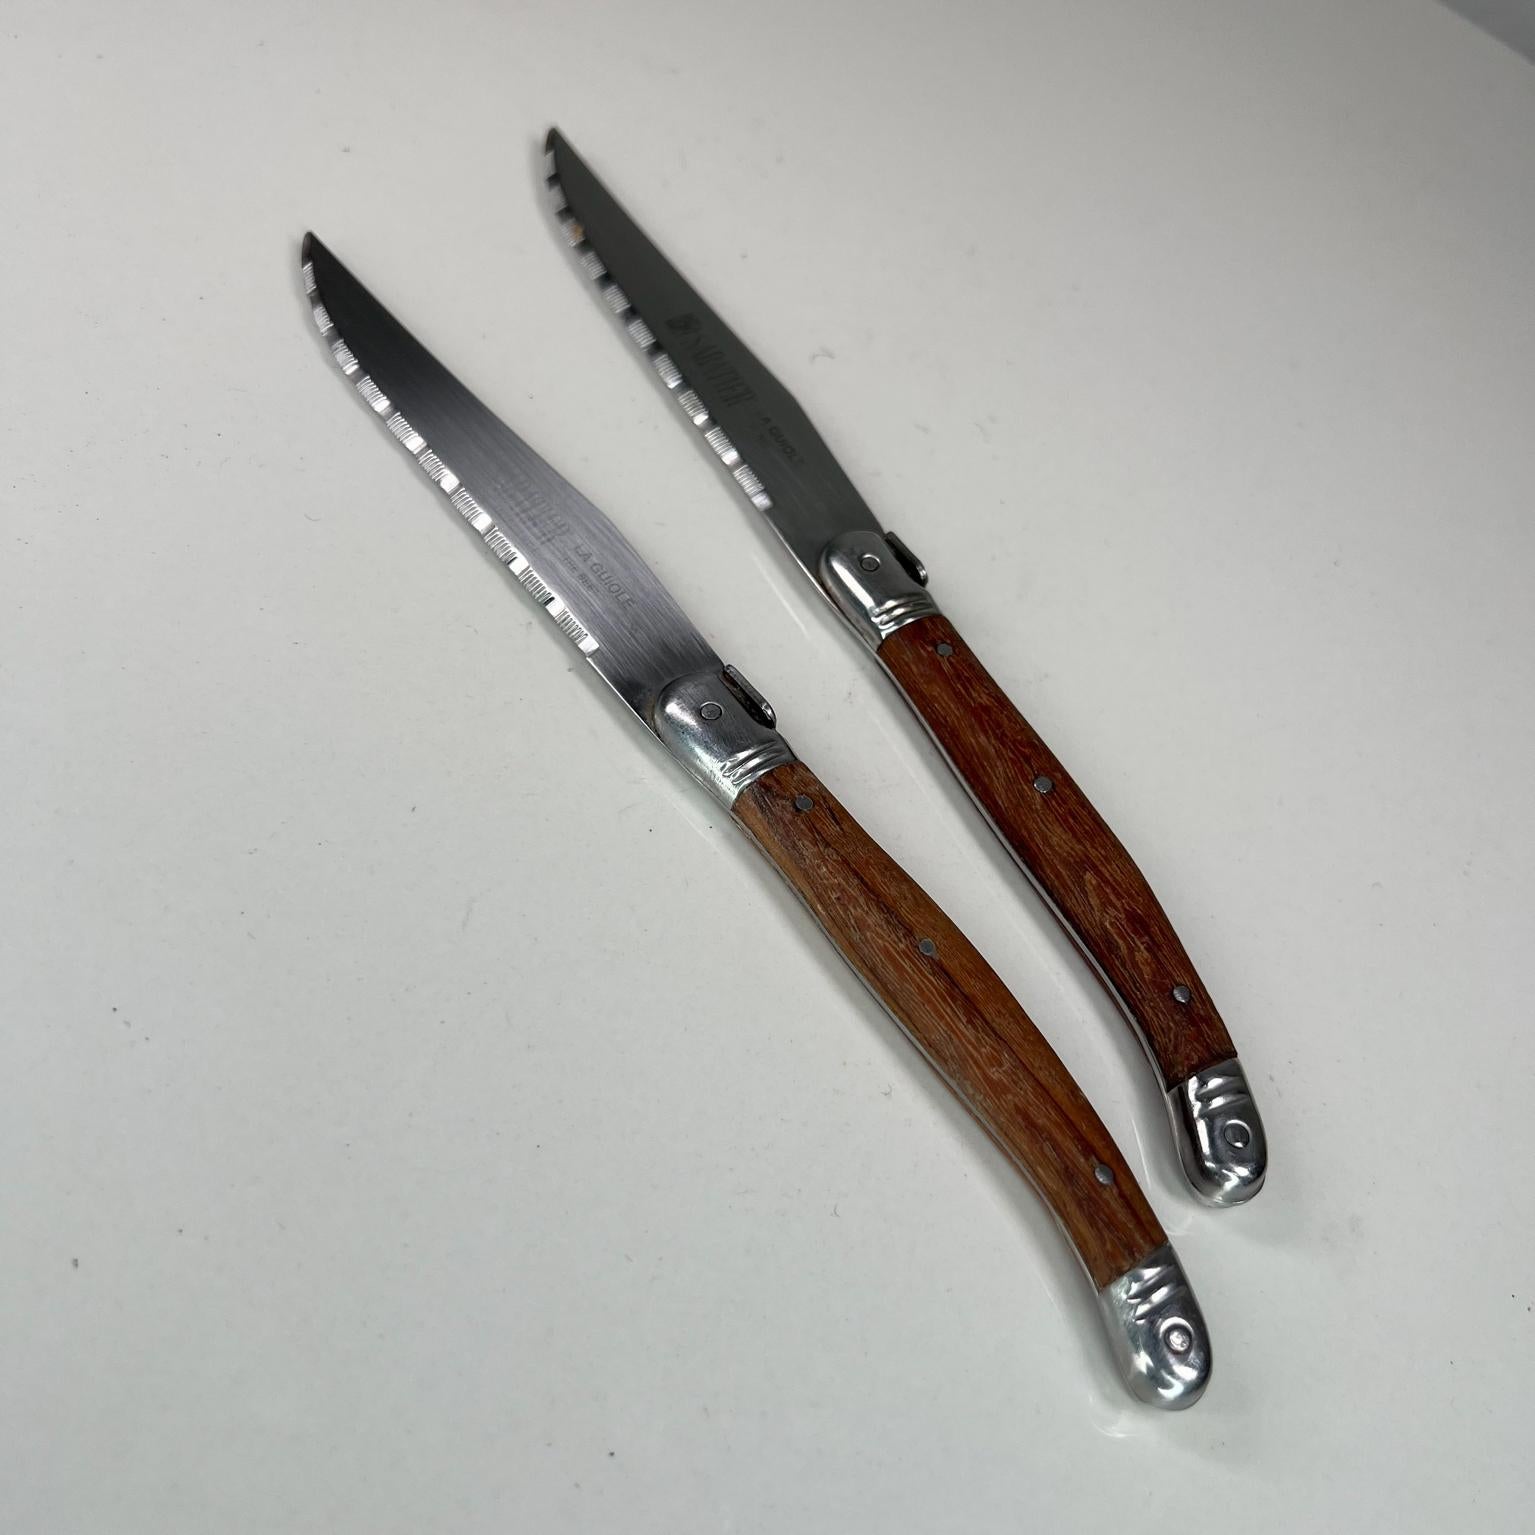 The Bee Laguiole two knives Sabatier France
Wood handle stainless steel 
9 long x .5 x .5
Maker stamp
Preowned vintage condition.
See images please.
 